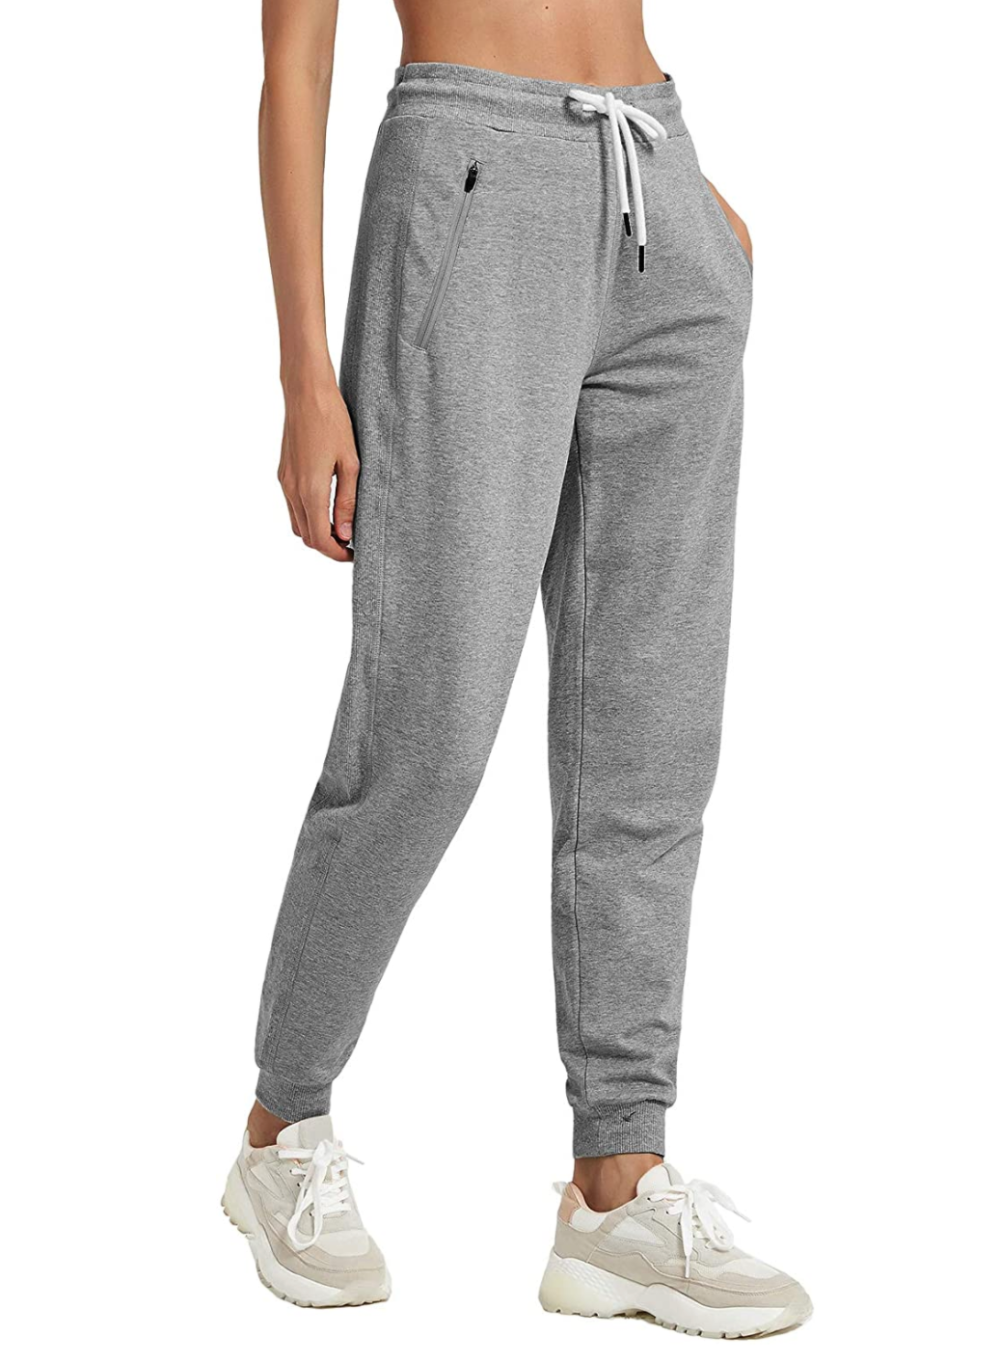 Puli Simple Joggers Are a Staple in Every Loungewear Wardrobe | Us Weekly